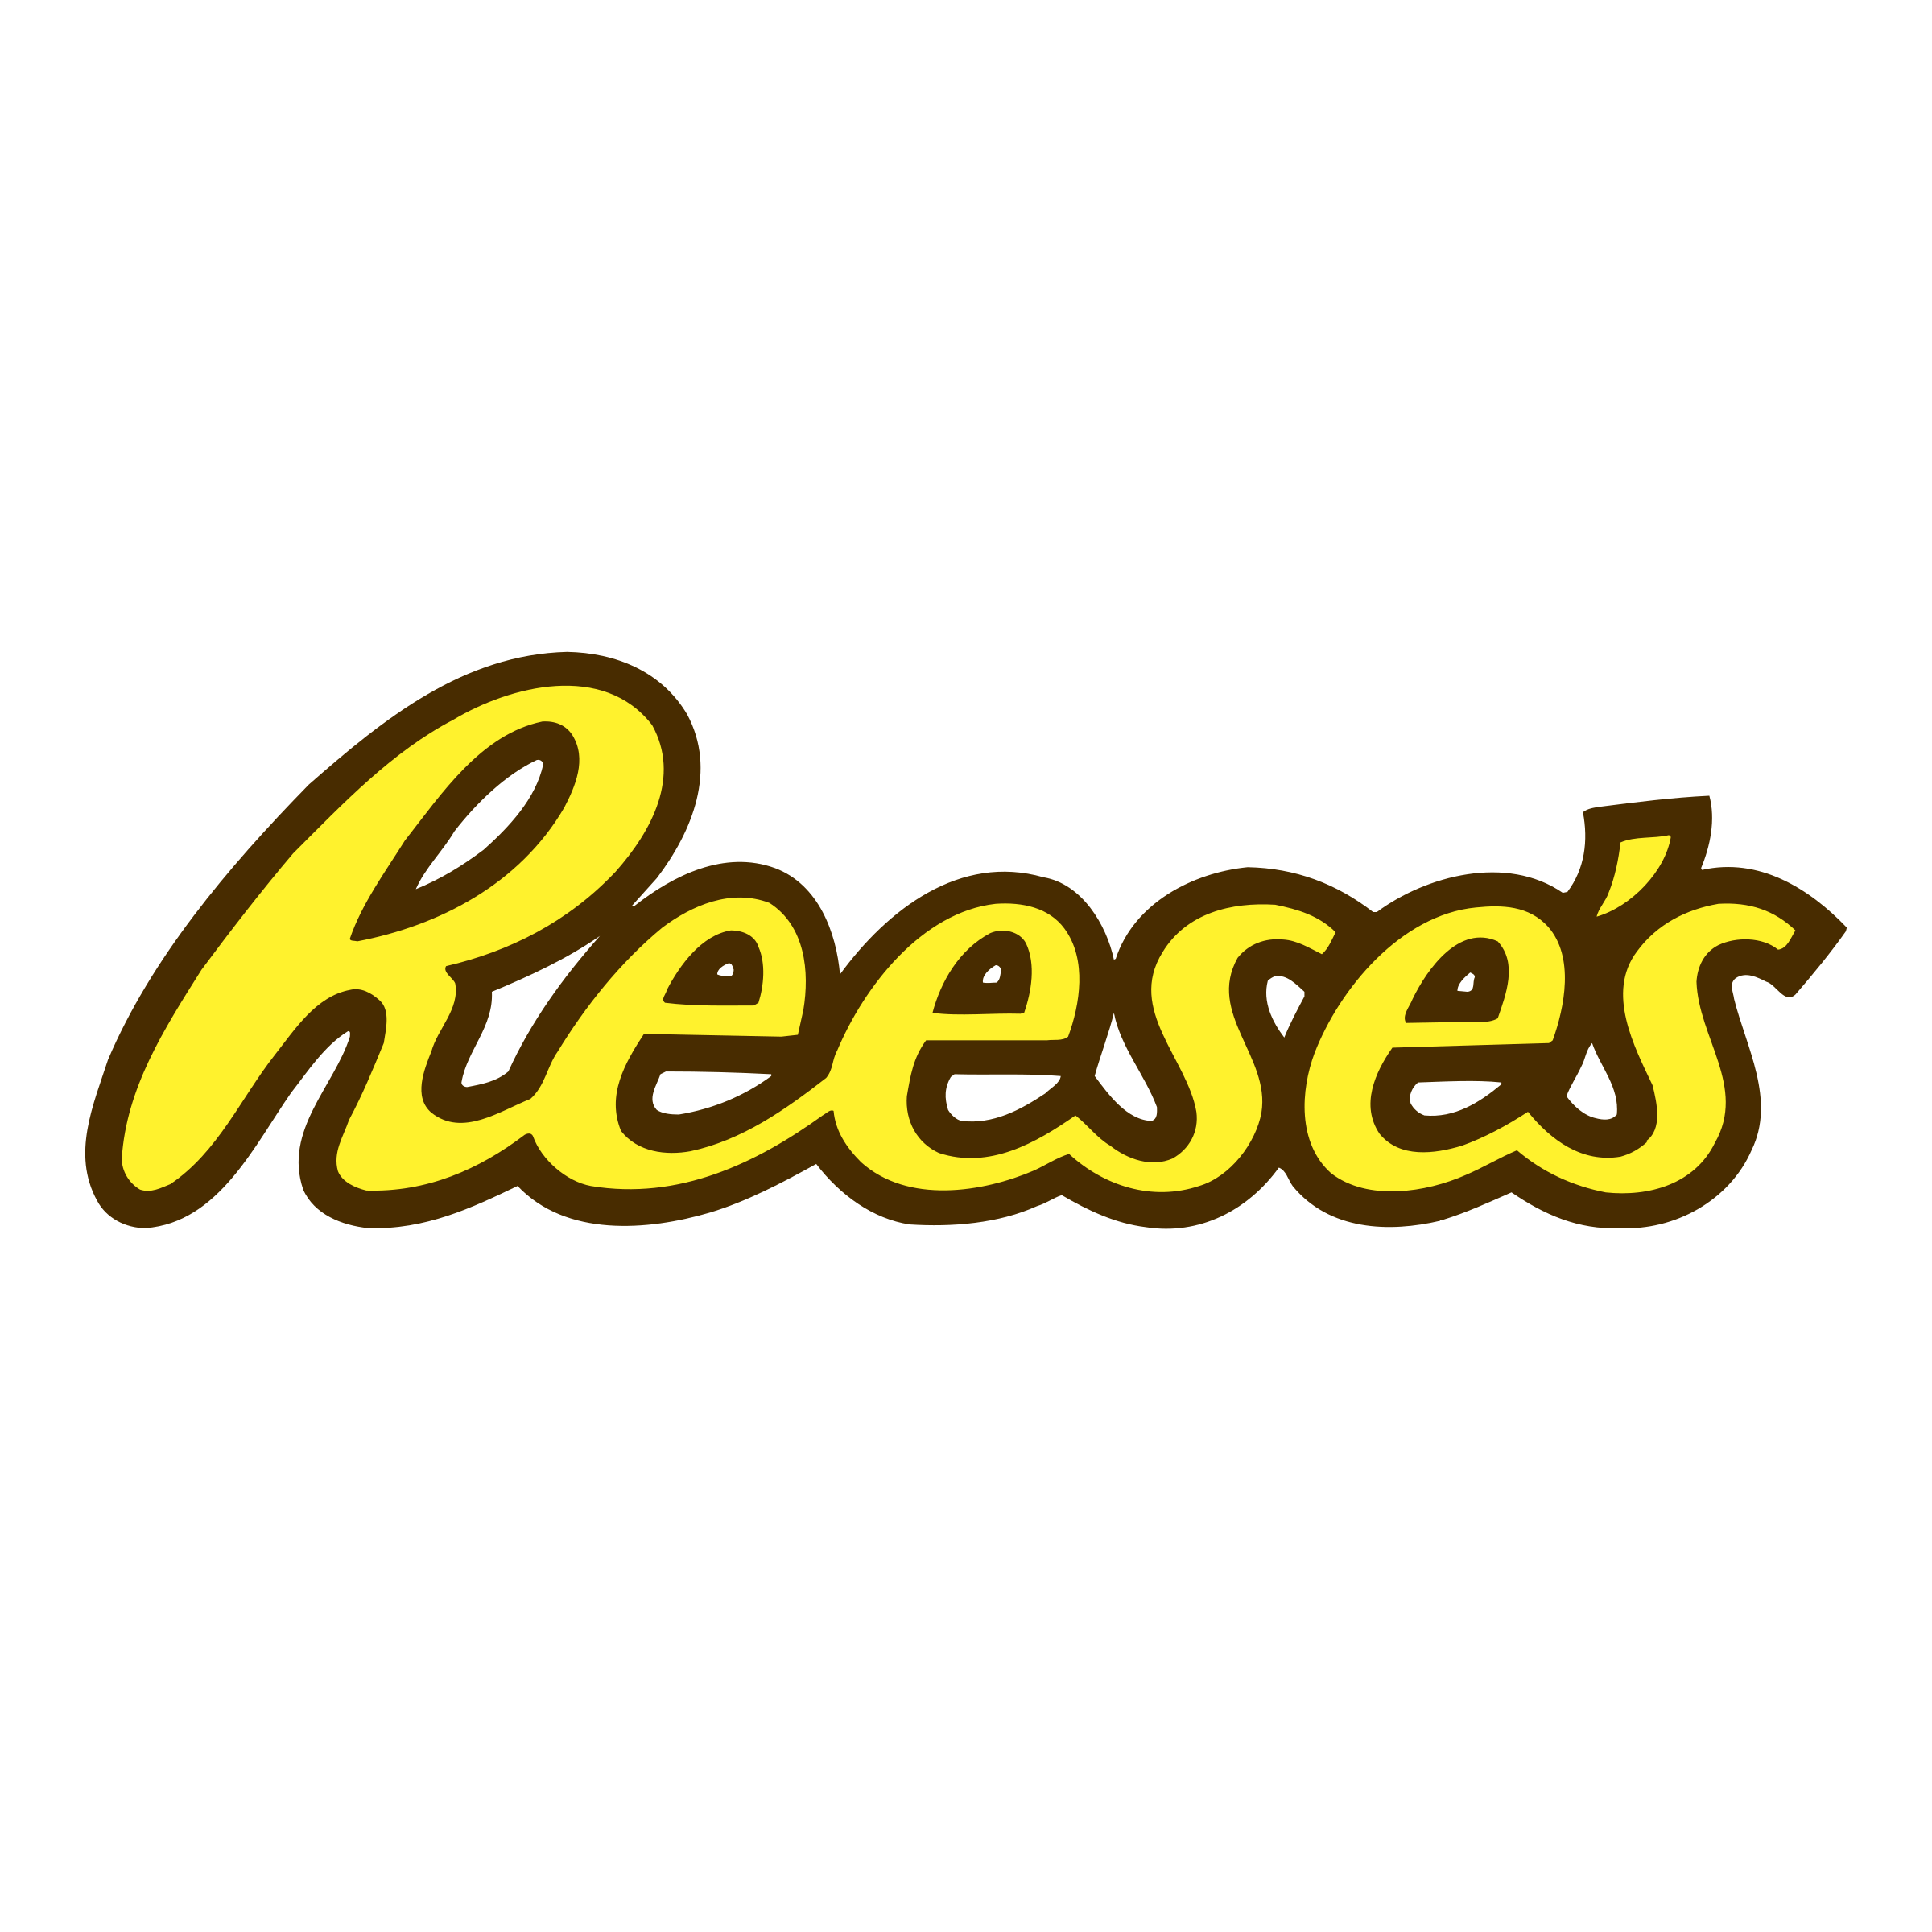 Reese's Logo - Reese's Logo PNG Transparent & SVG Vector - Freebie Supply